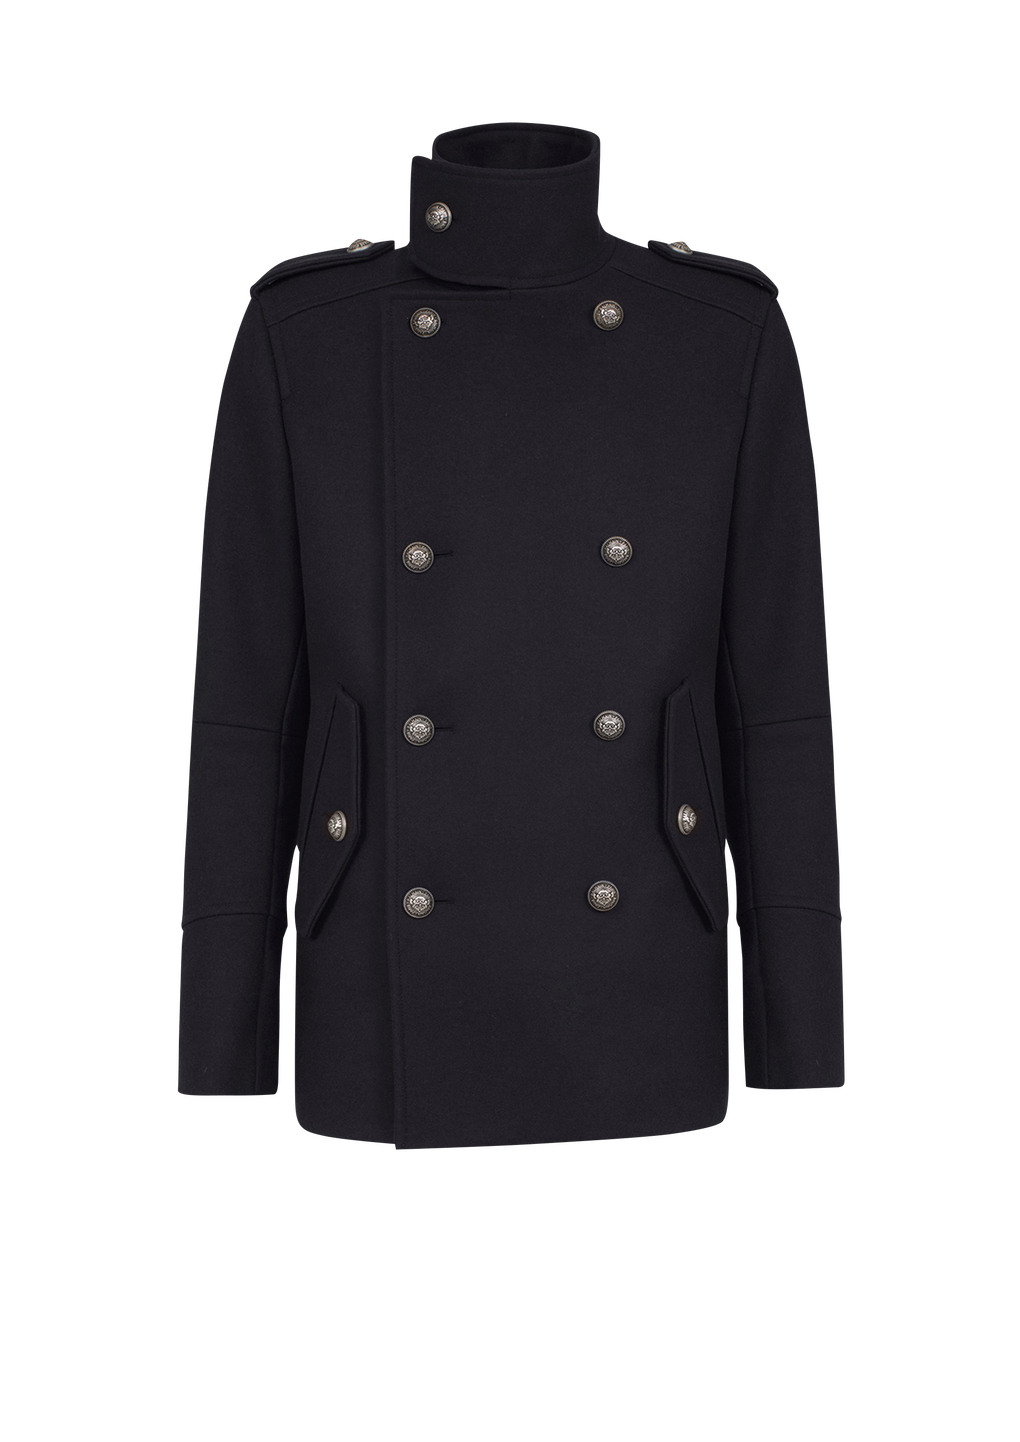 Wool military pea coat with double-breasted silver-tone buttoned fastening, black, hi-res